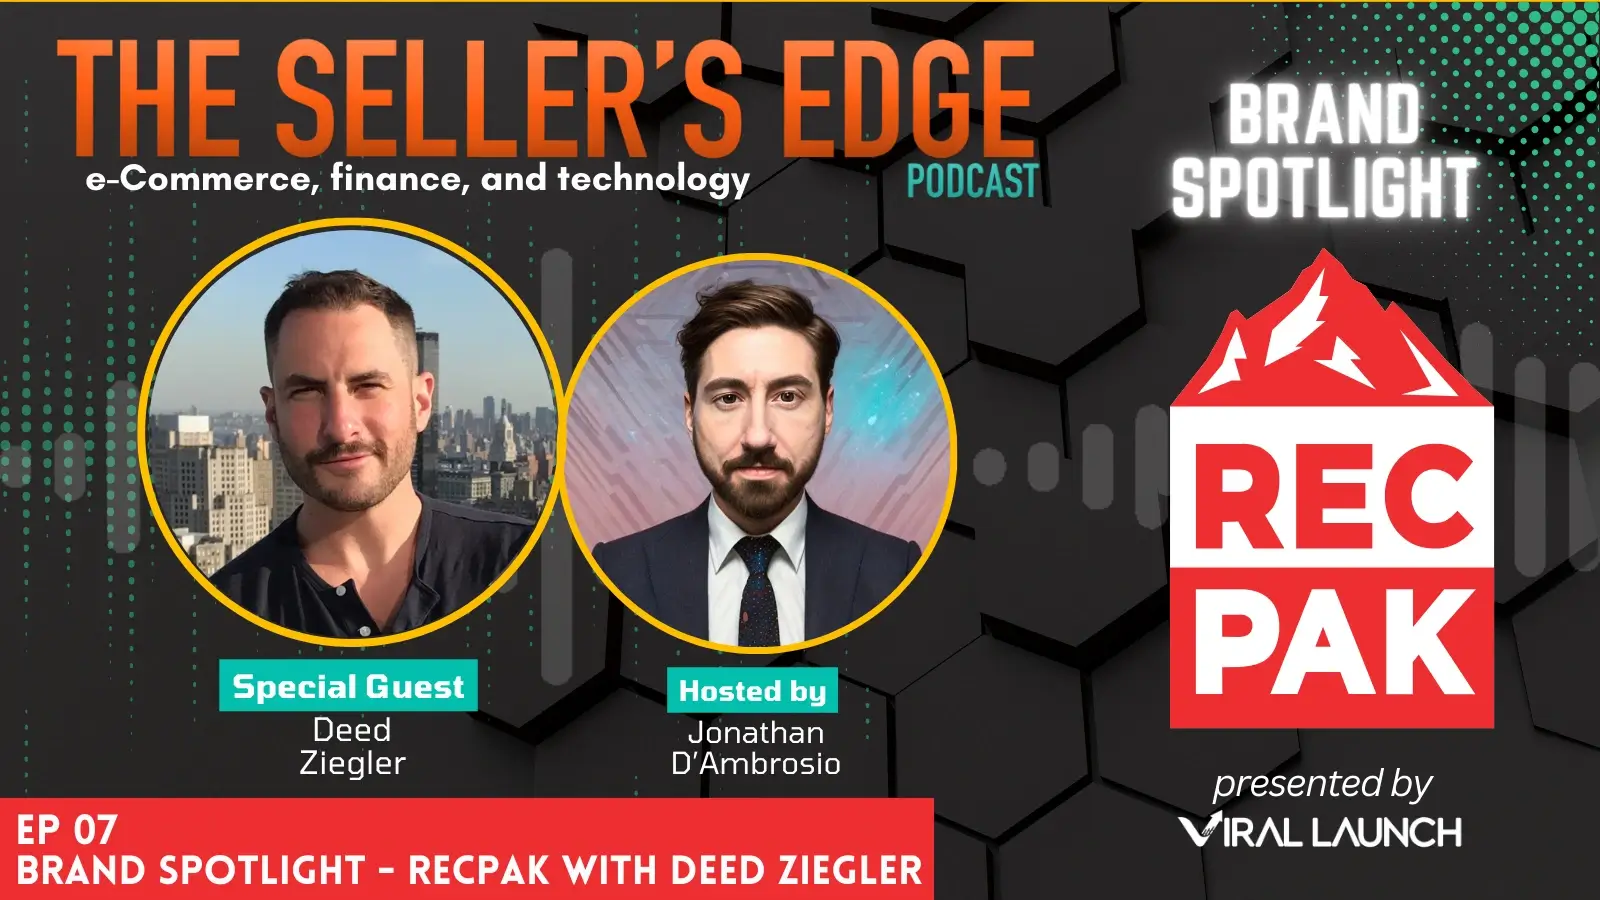 Deed Ziegler of Re Pak featured image for The Seller's Edge Podcast.